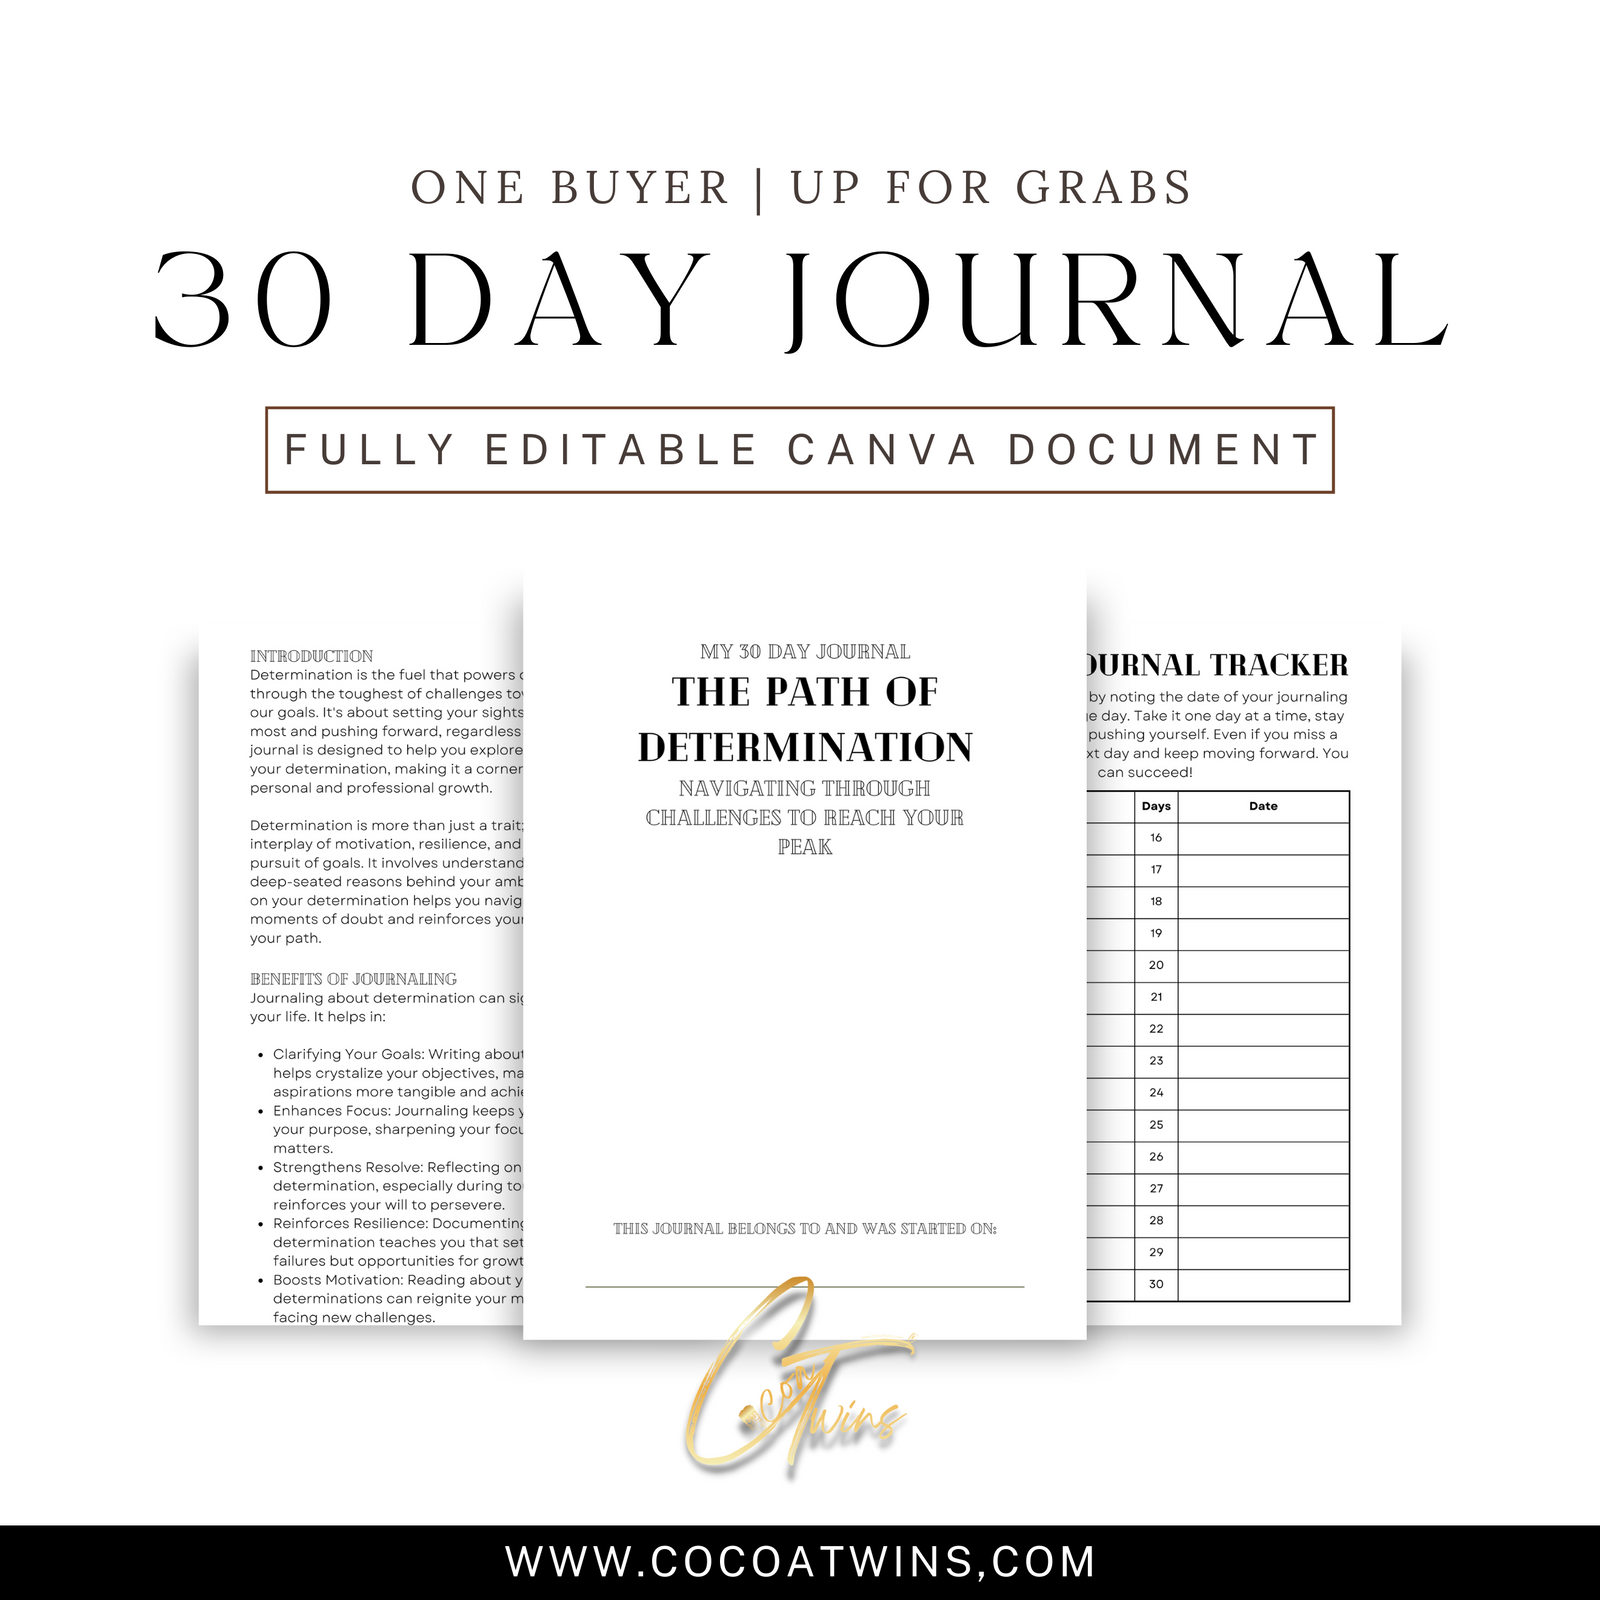 The Path of Determination - Navigating Through Challenges to Reach Your Peak - EB | One Buyer 30 Day Prompt Journal